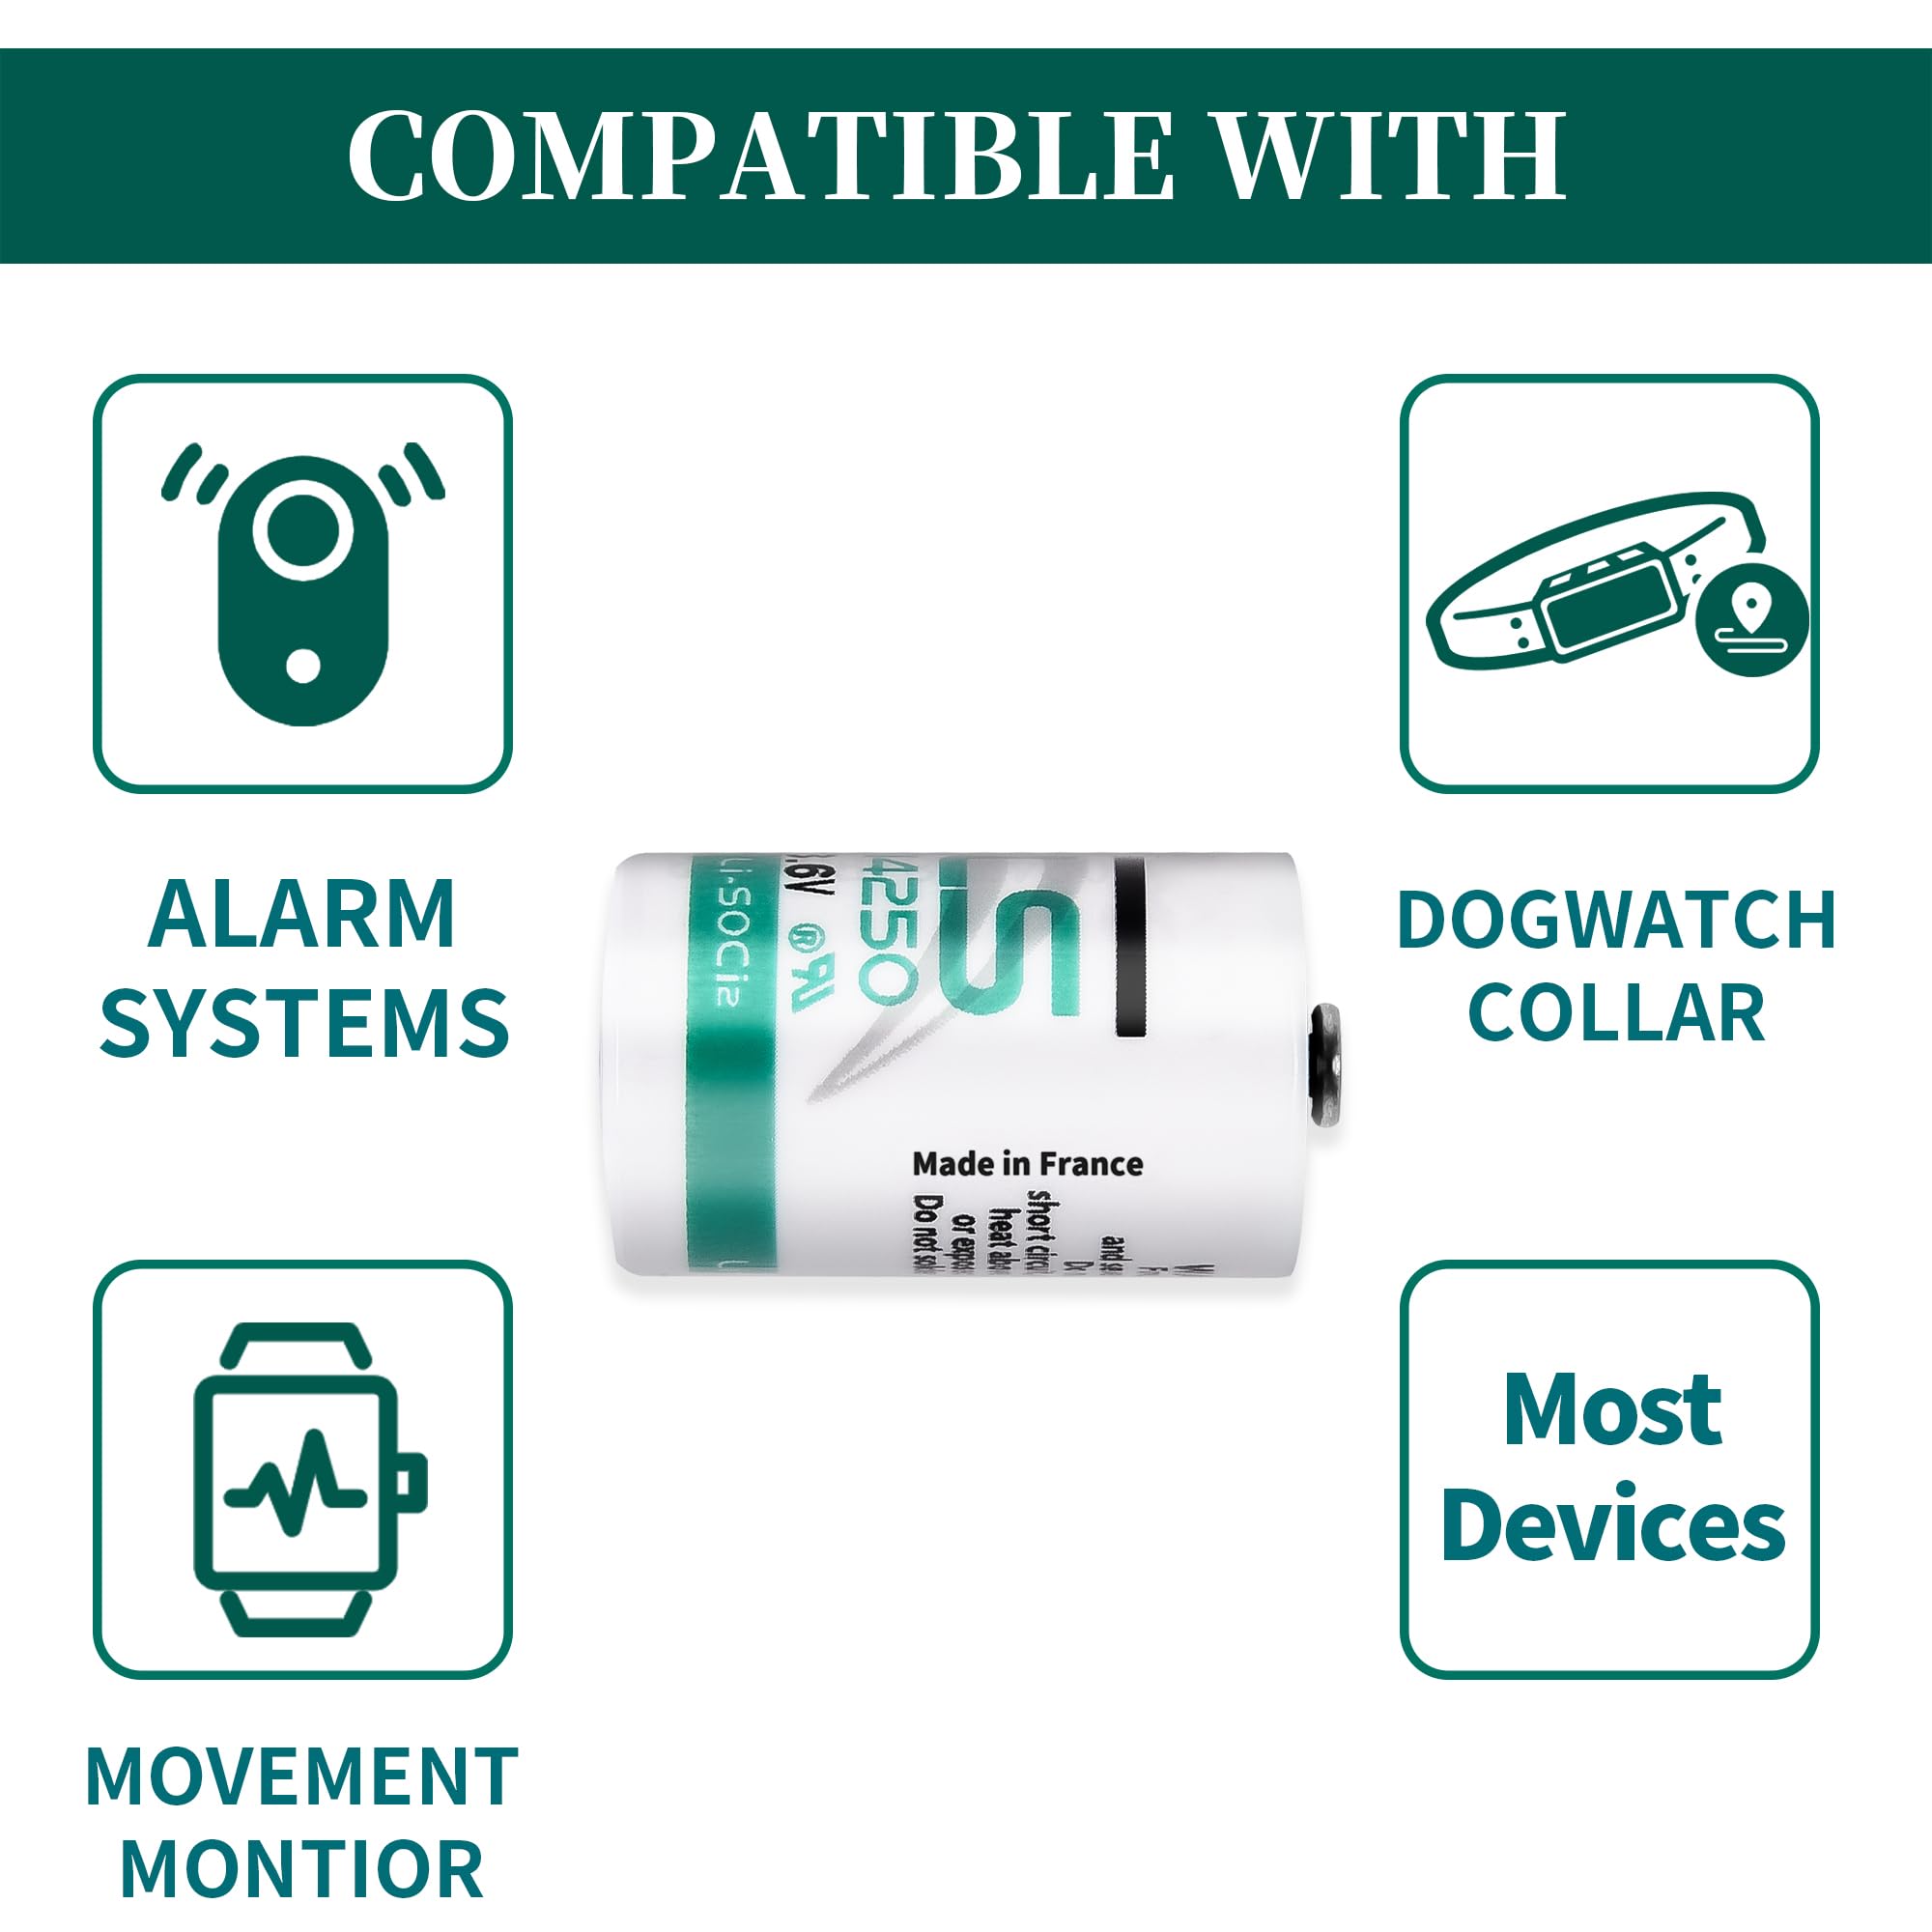 iNFISAN 2 X SAFT LS14250 1/2 AA 3.6v Battery 14250 Can Use for Dogwatch R9 Leash 1200mAh High Capacity